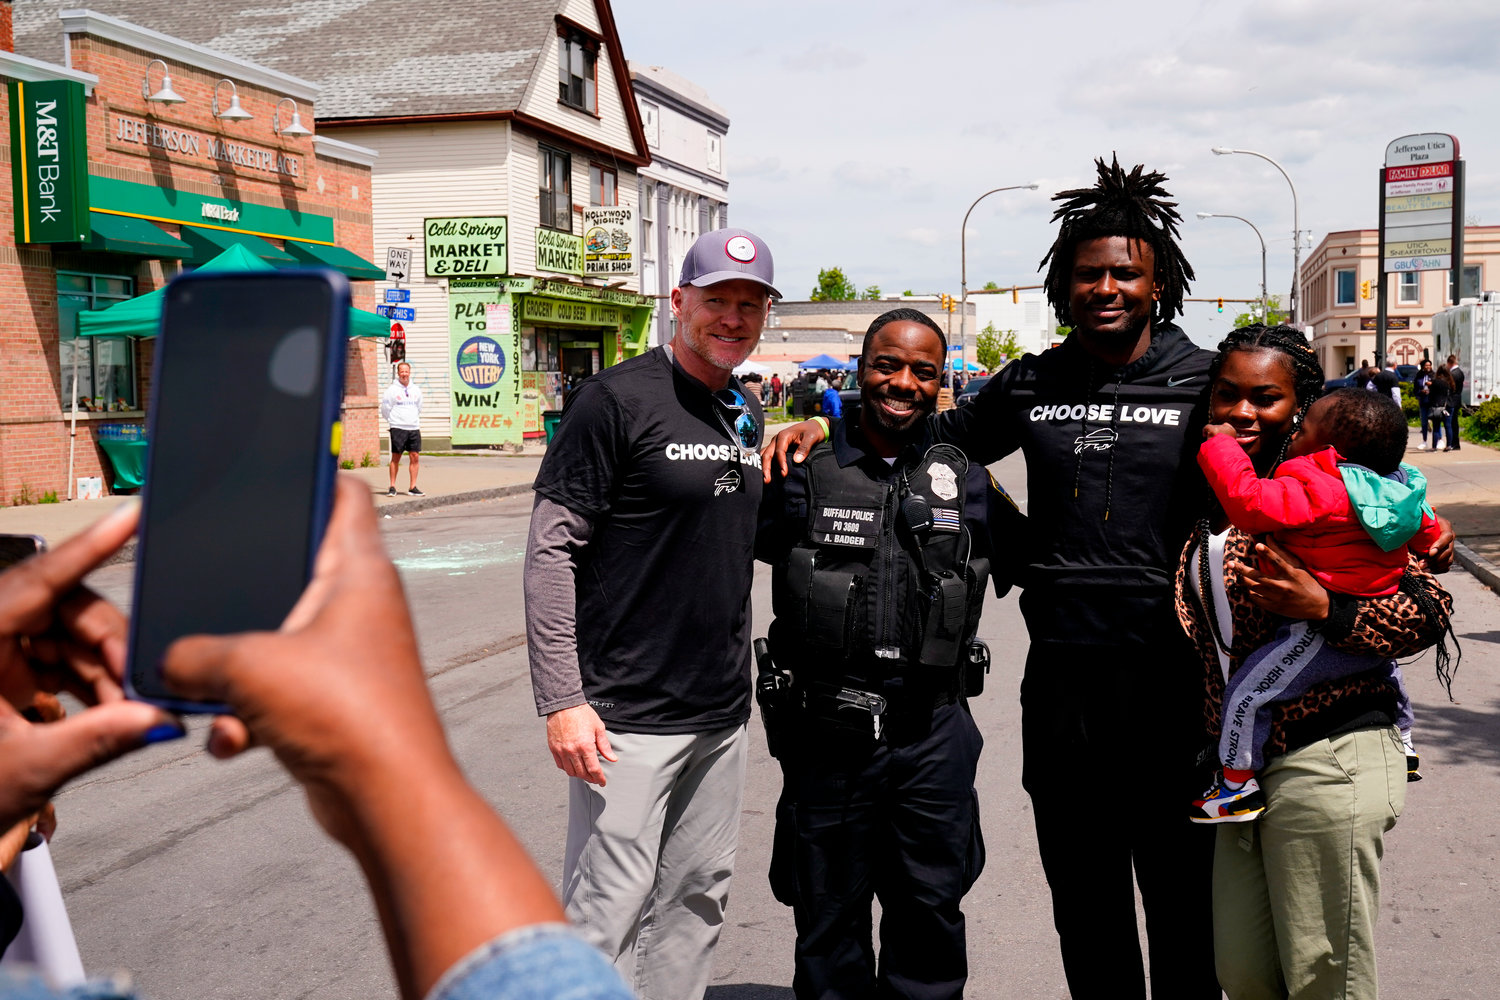 Buffalo Bills' Josh Thomas, second right, and coach Sean McDermott, center left, poses for a photograph near the scene of Saturday's shooting at a supermarket, in Buffalo, N.Y., Wednesday, May 18, 2022. (AP Photo/Matt Rourke)